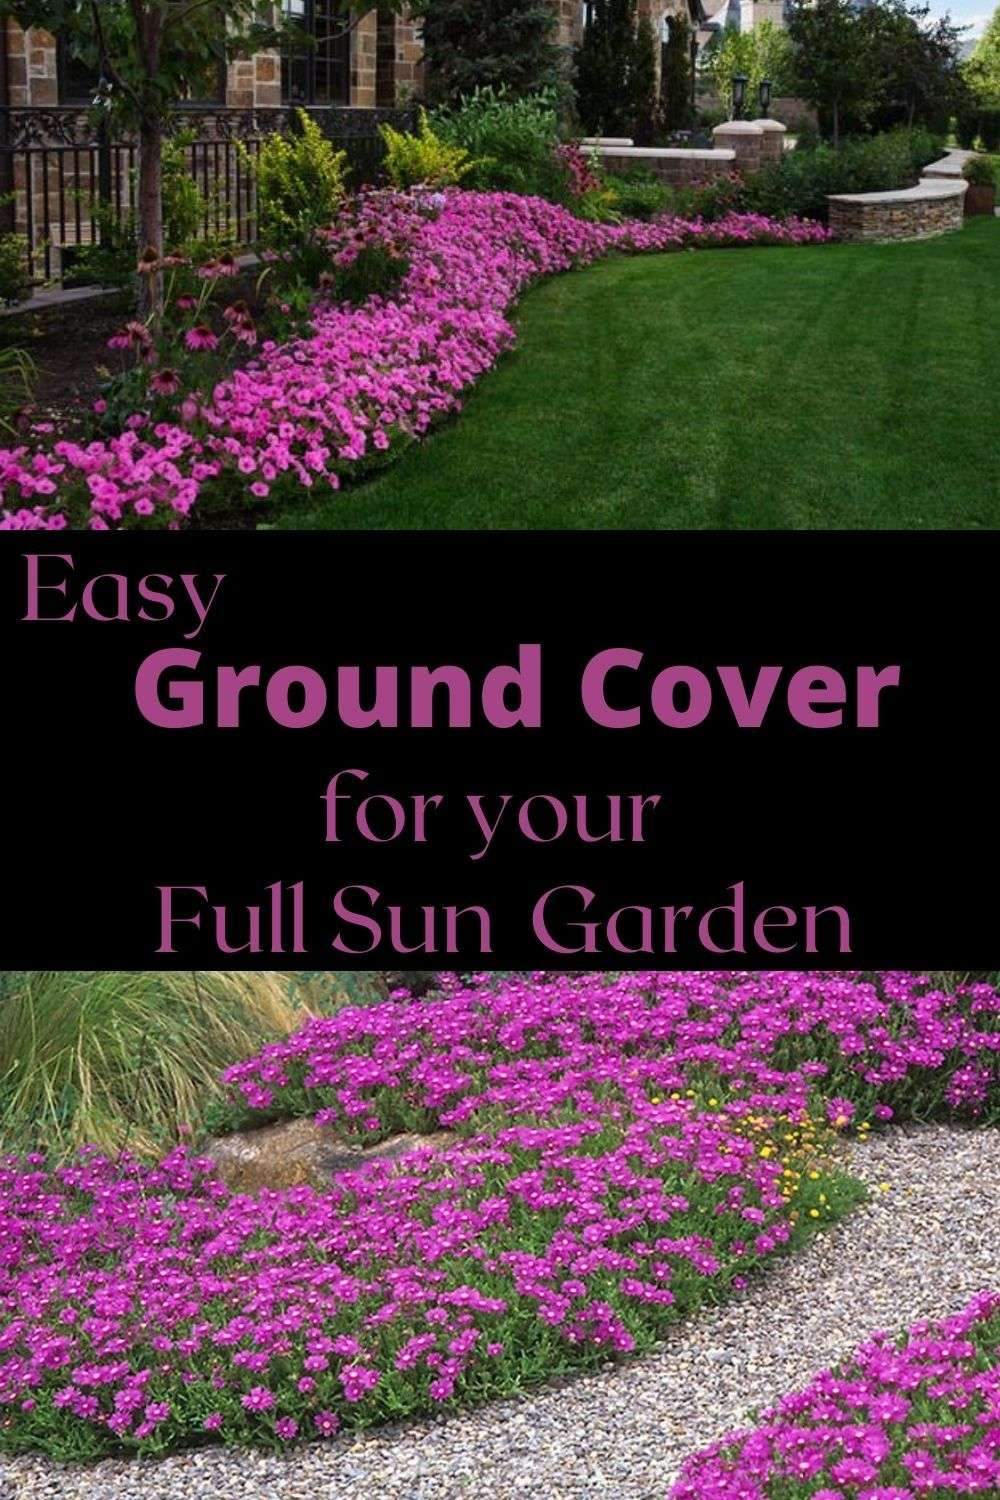 Try these brightly colored flowers for a Sunny Ground Cover